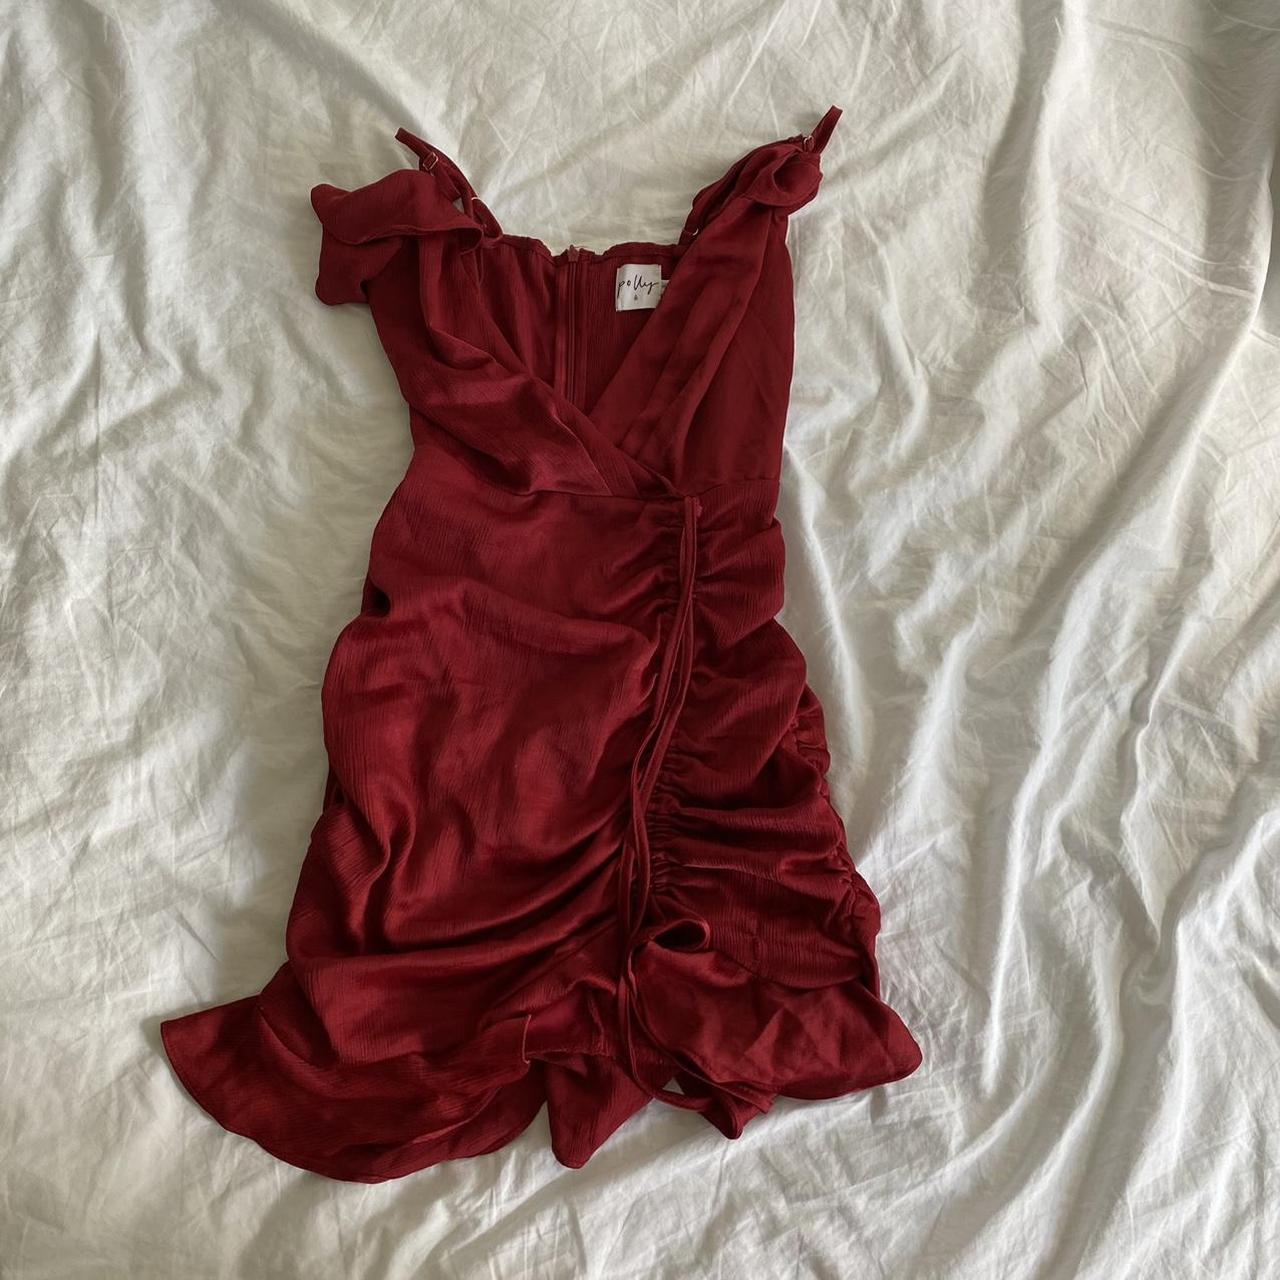 Princess Polly mini red frilly dress - only worn once - Depop